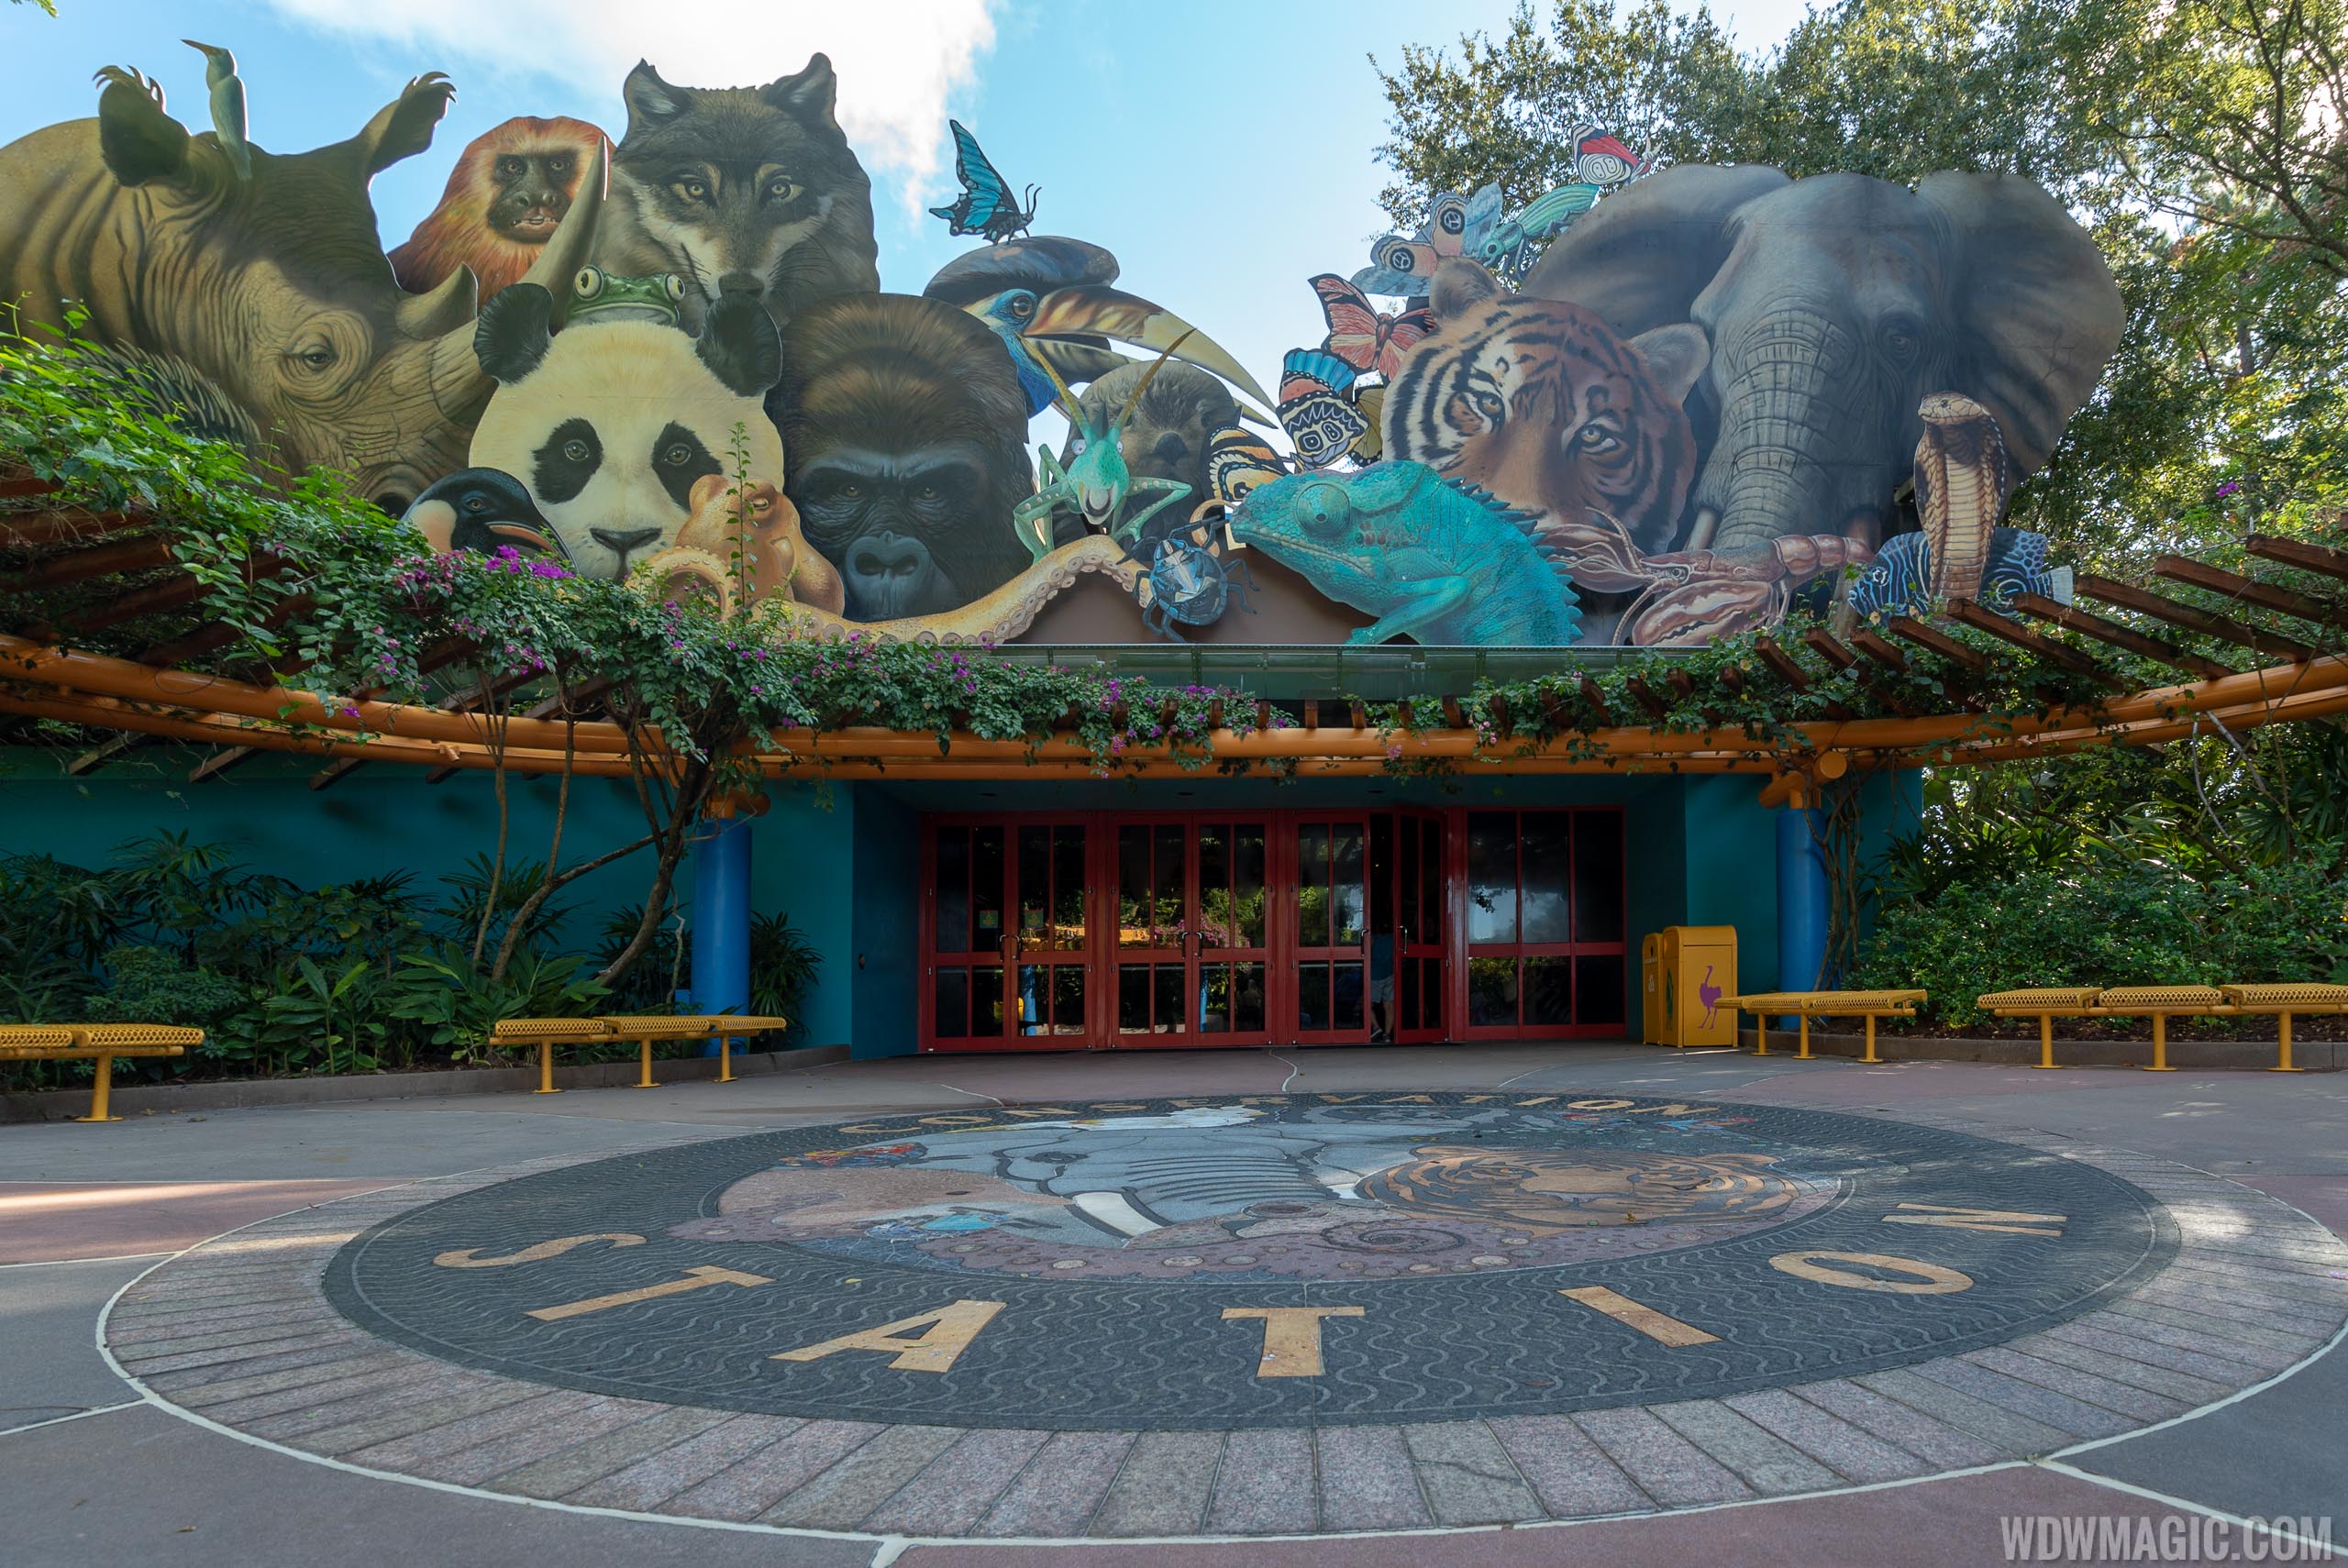 Affection Section is part of the Conservation Station at Rafiki's Planet Watch